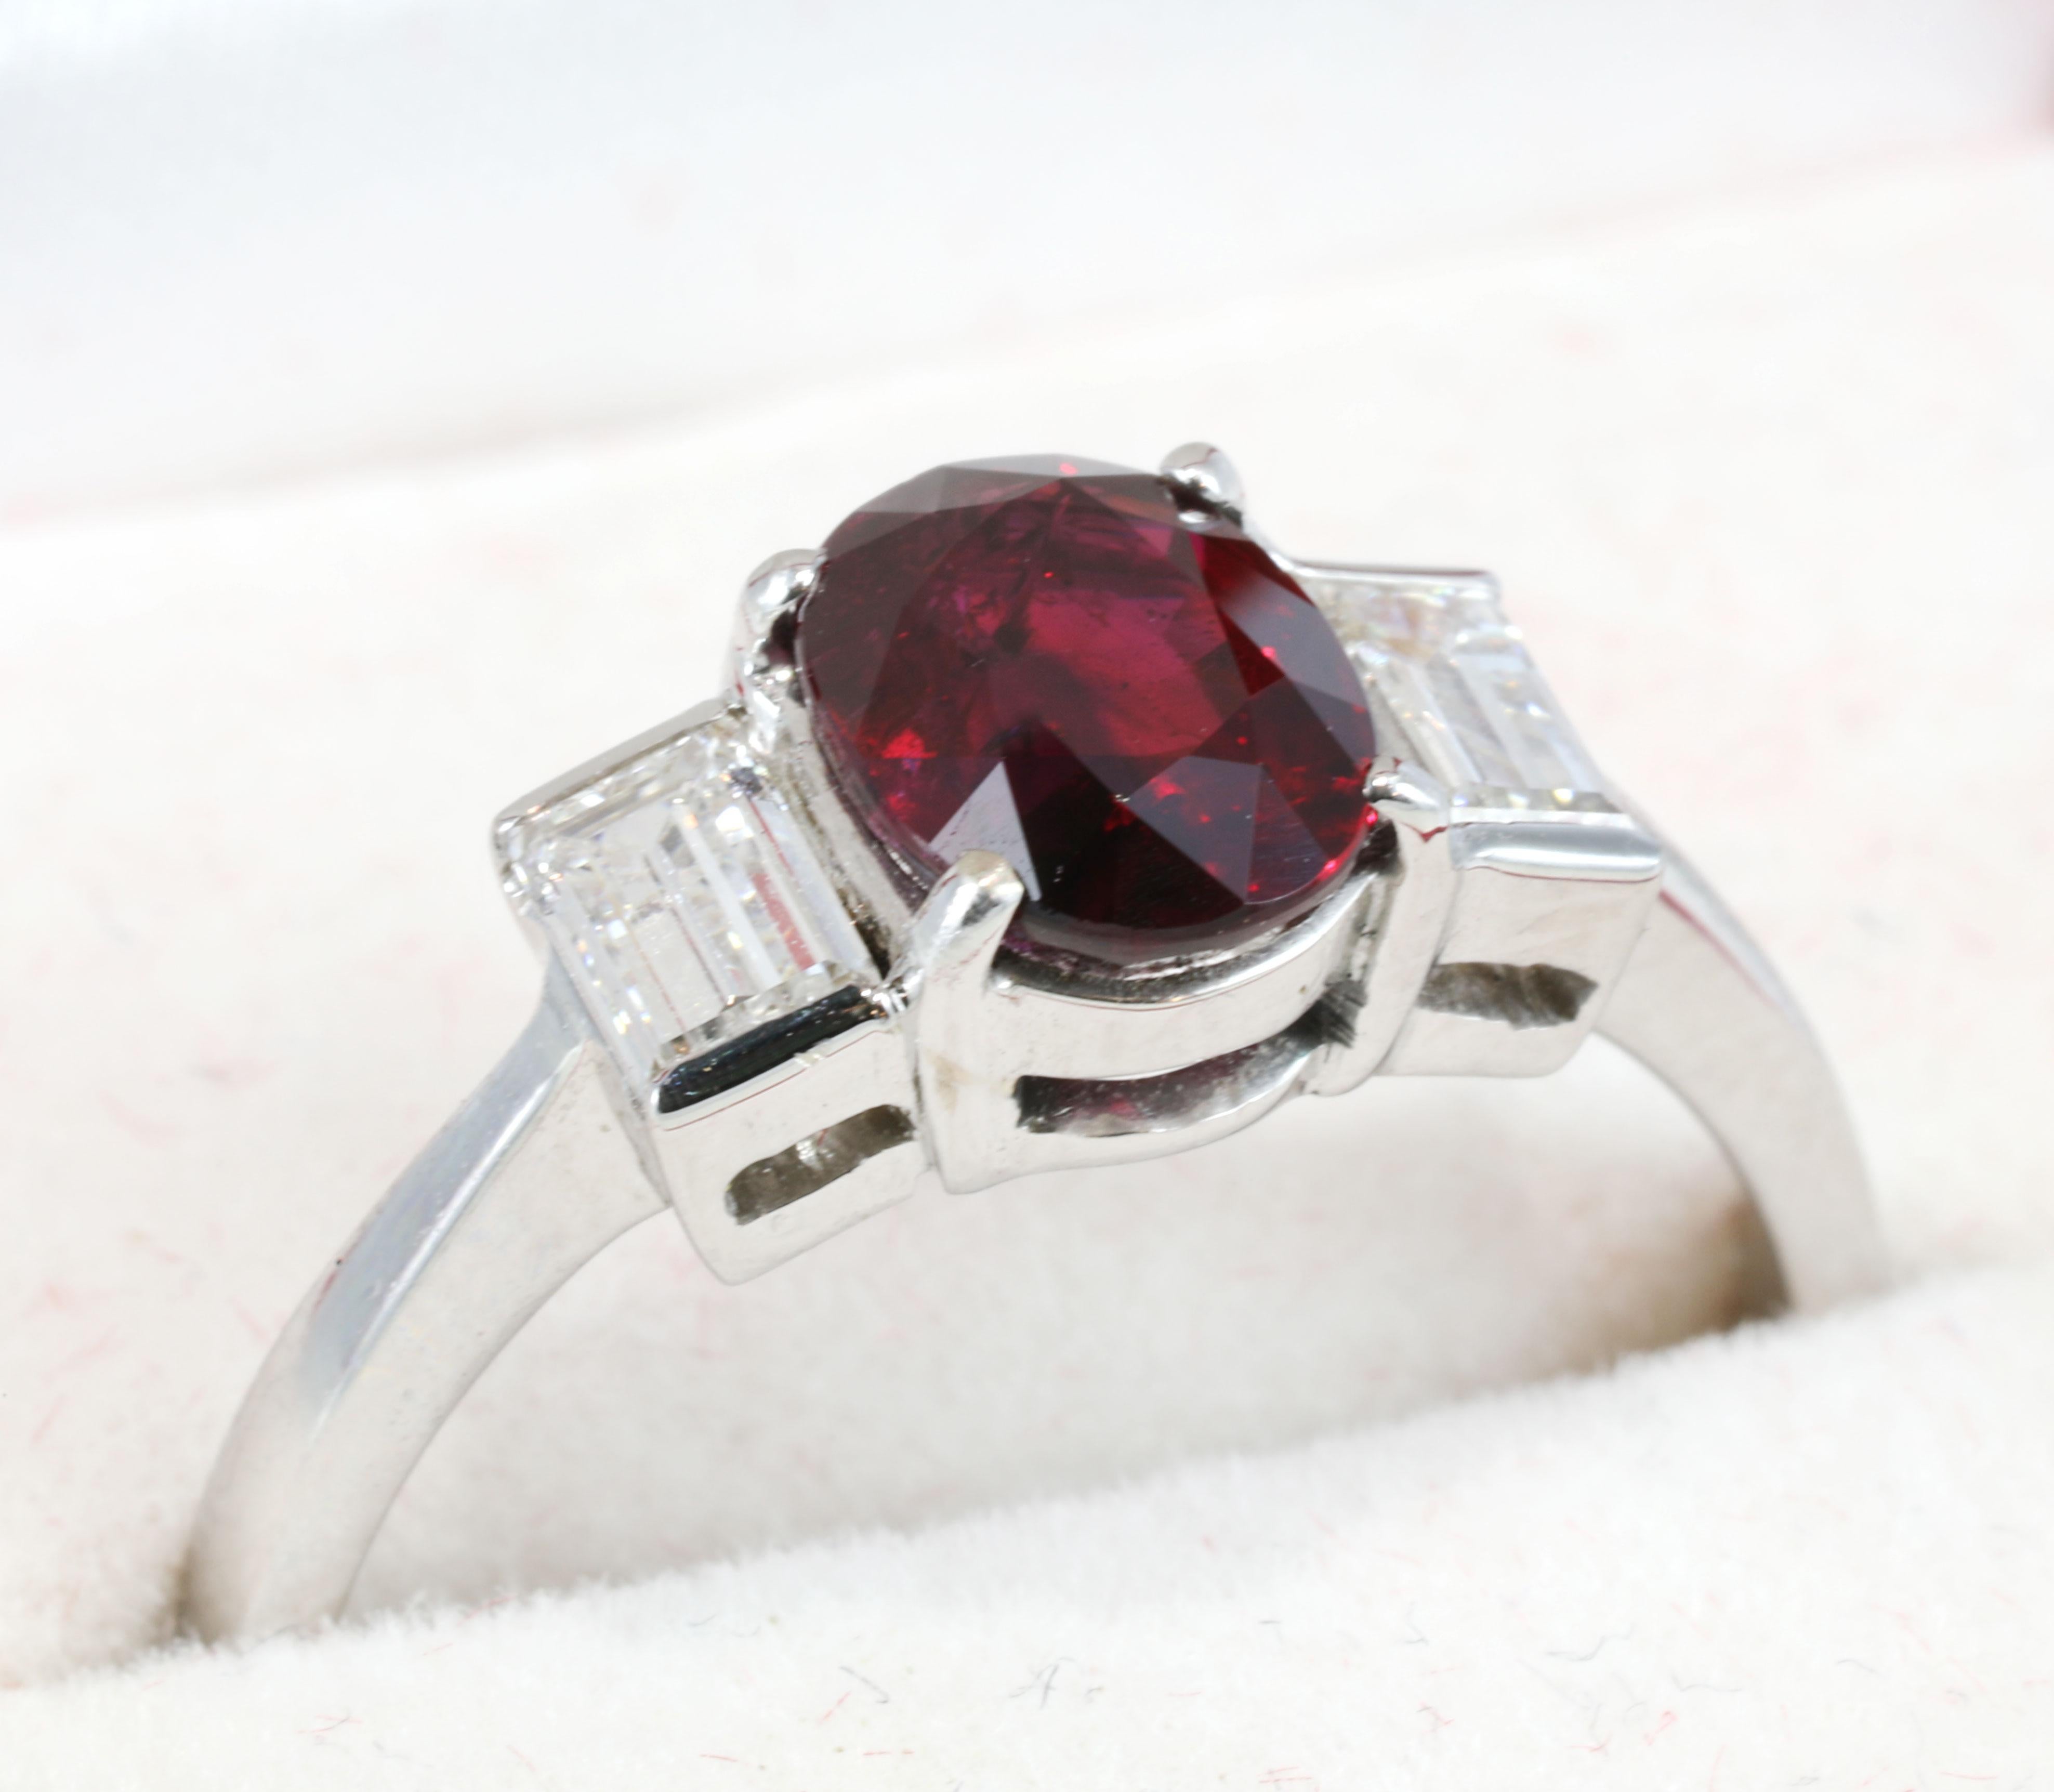 Unheated 1.54 Carat “Pigeon’s Blood” Burmese Ruby & Diamond 18K Gold Ring, GIA & GRS Certified.


center stone with a client stated weight of 1.54 carats set
in a white metal ring with two (2) near-colorless
Baguettes.
The color appearance of this